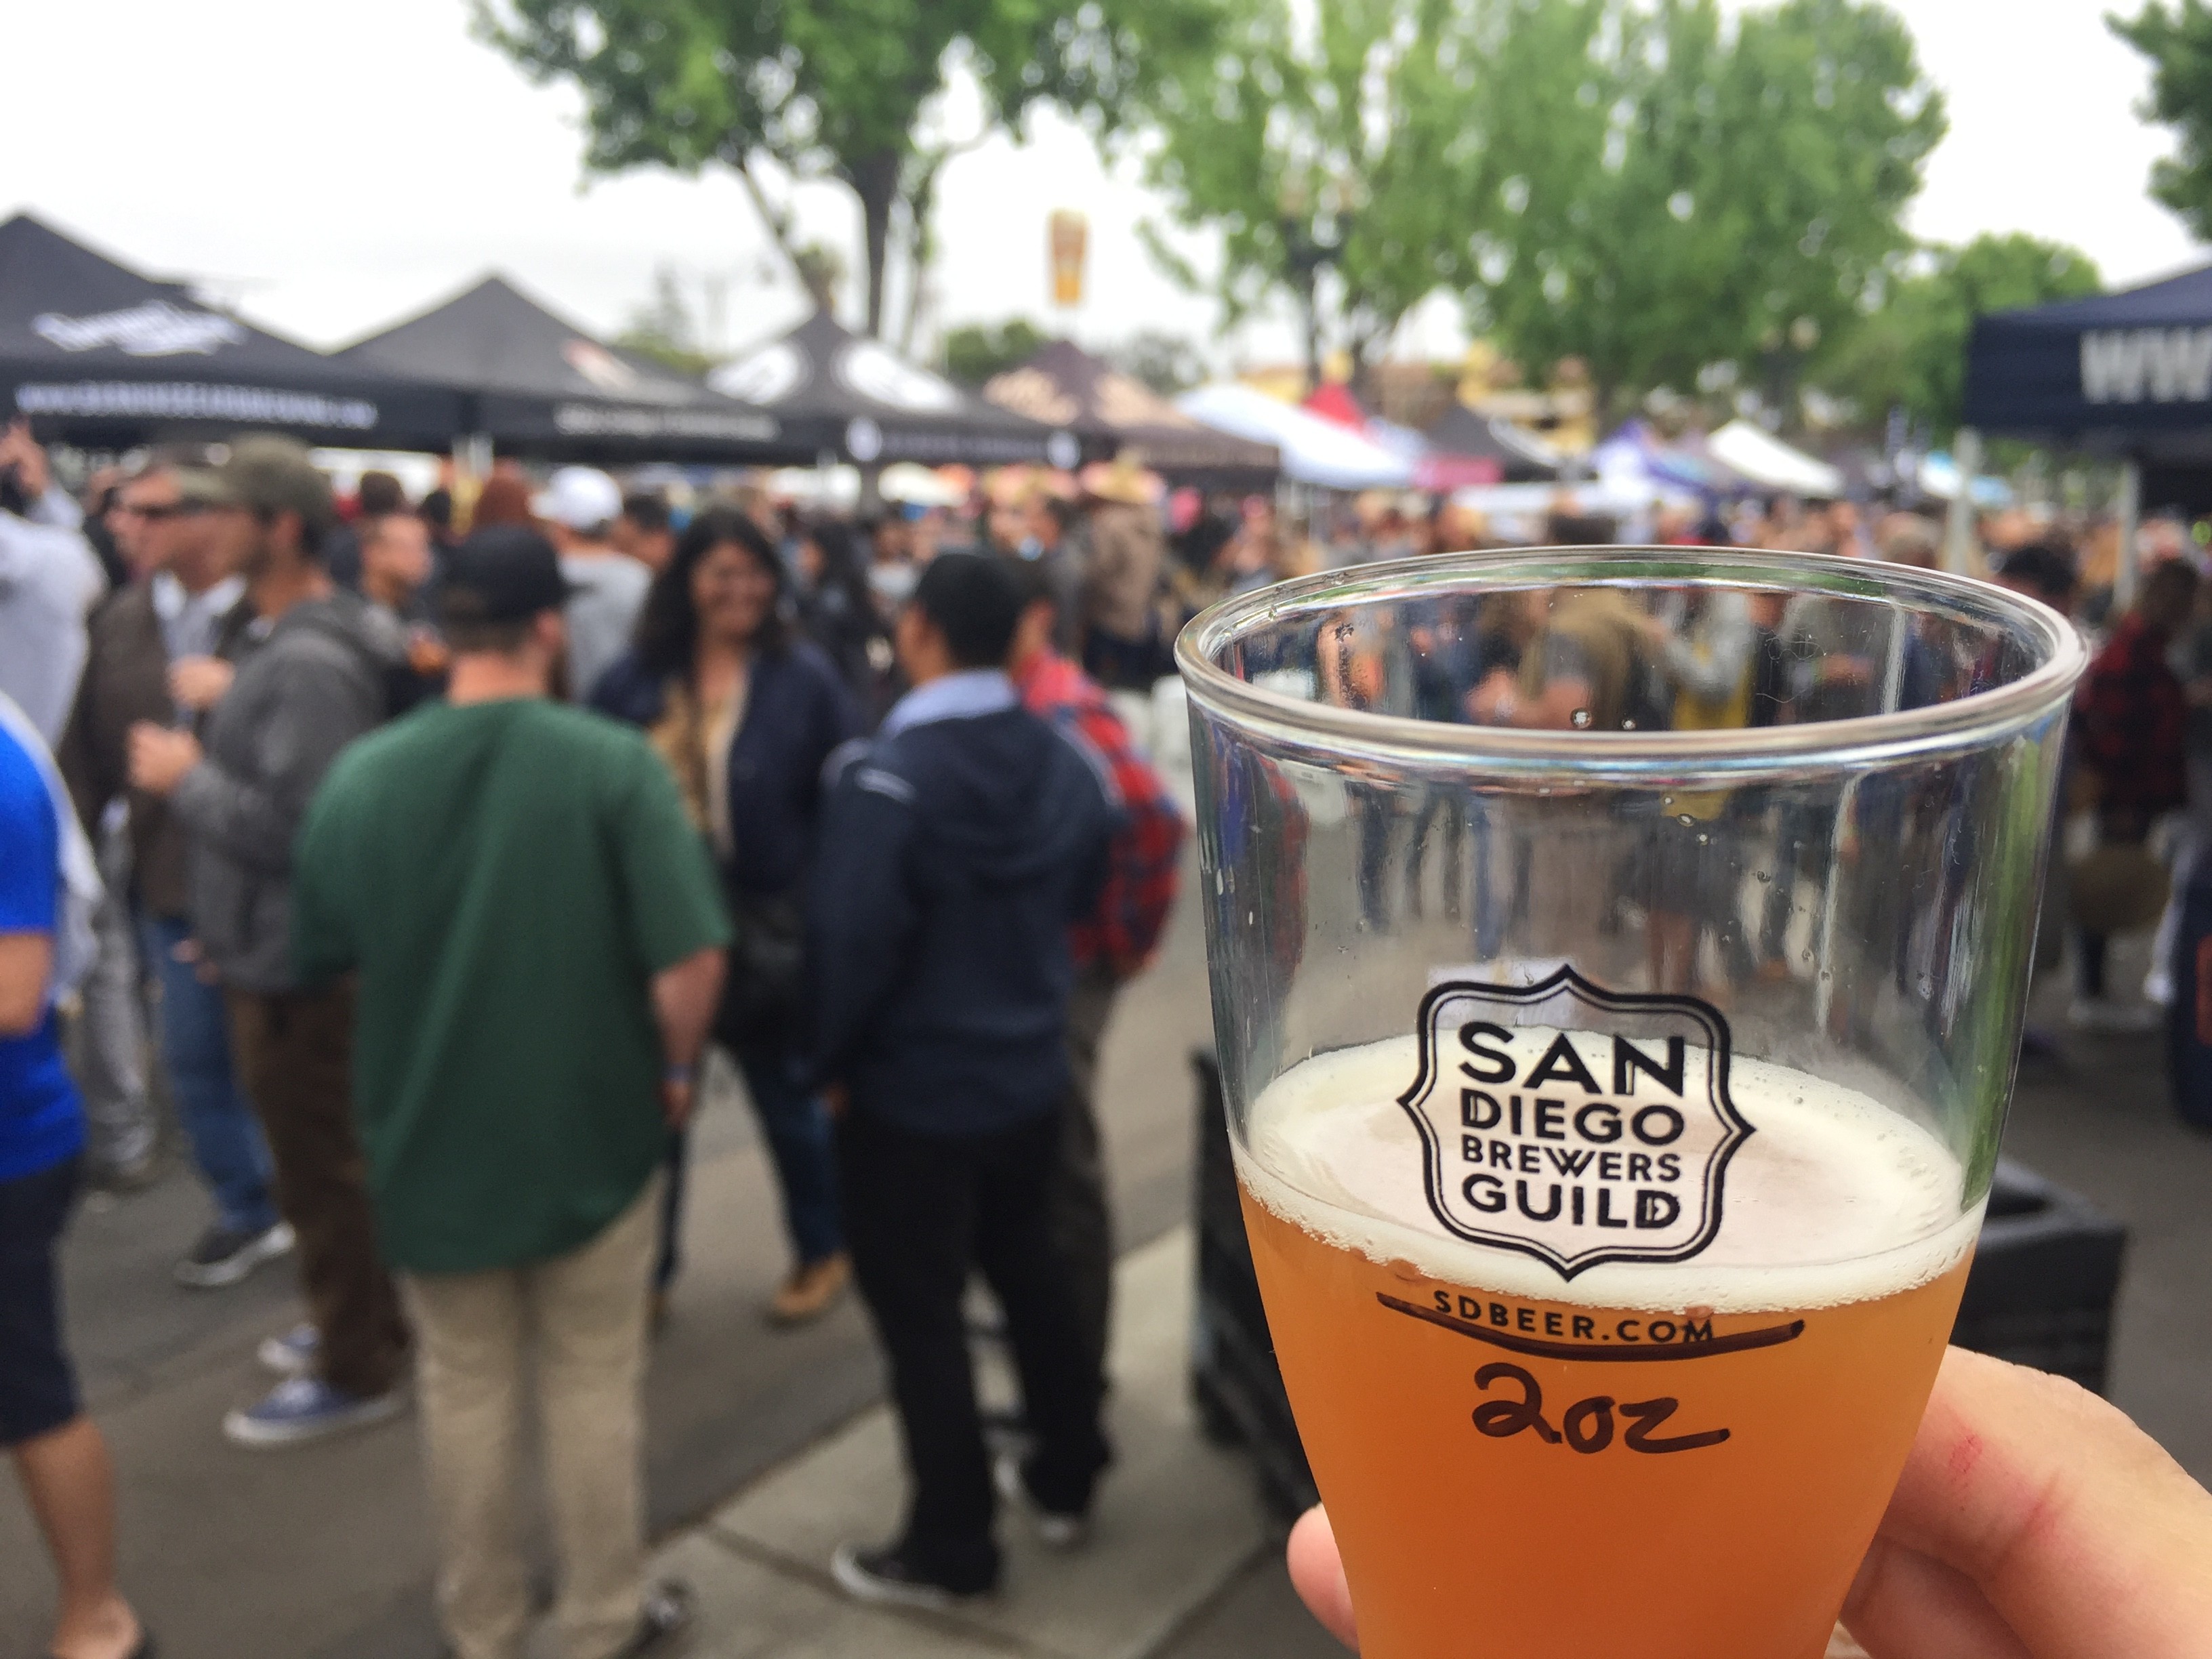 Guests of the Rhythm & Brews Festival received a 2-oz. glass for tasting. PHOTO SULLIVAN